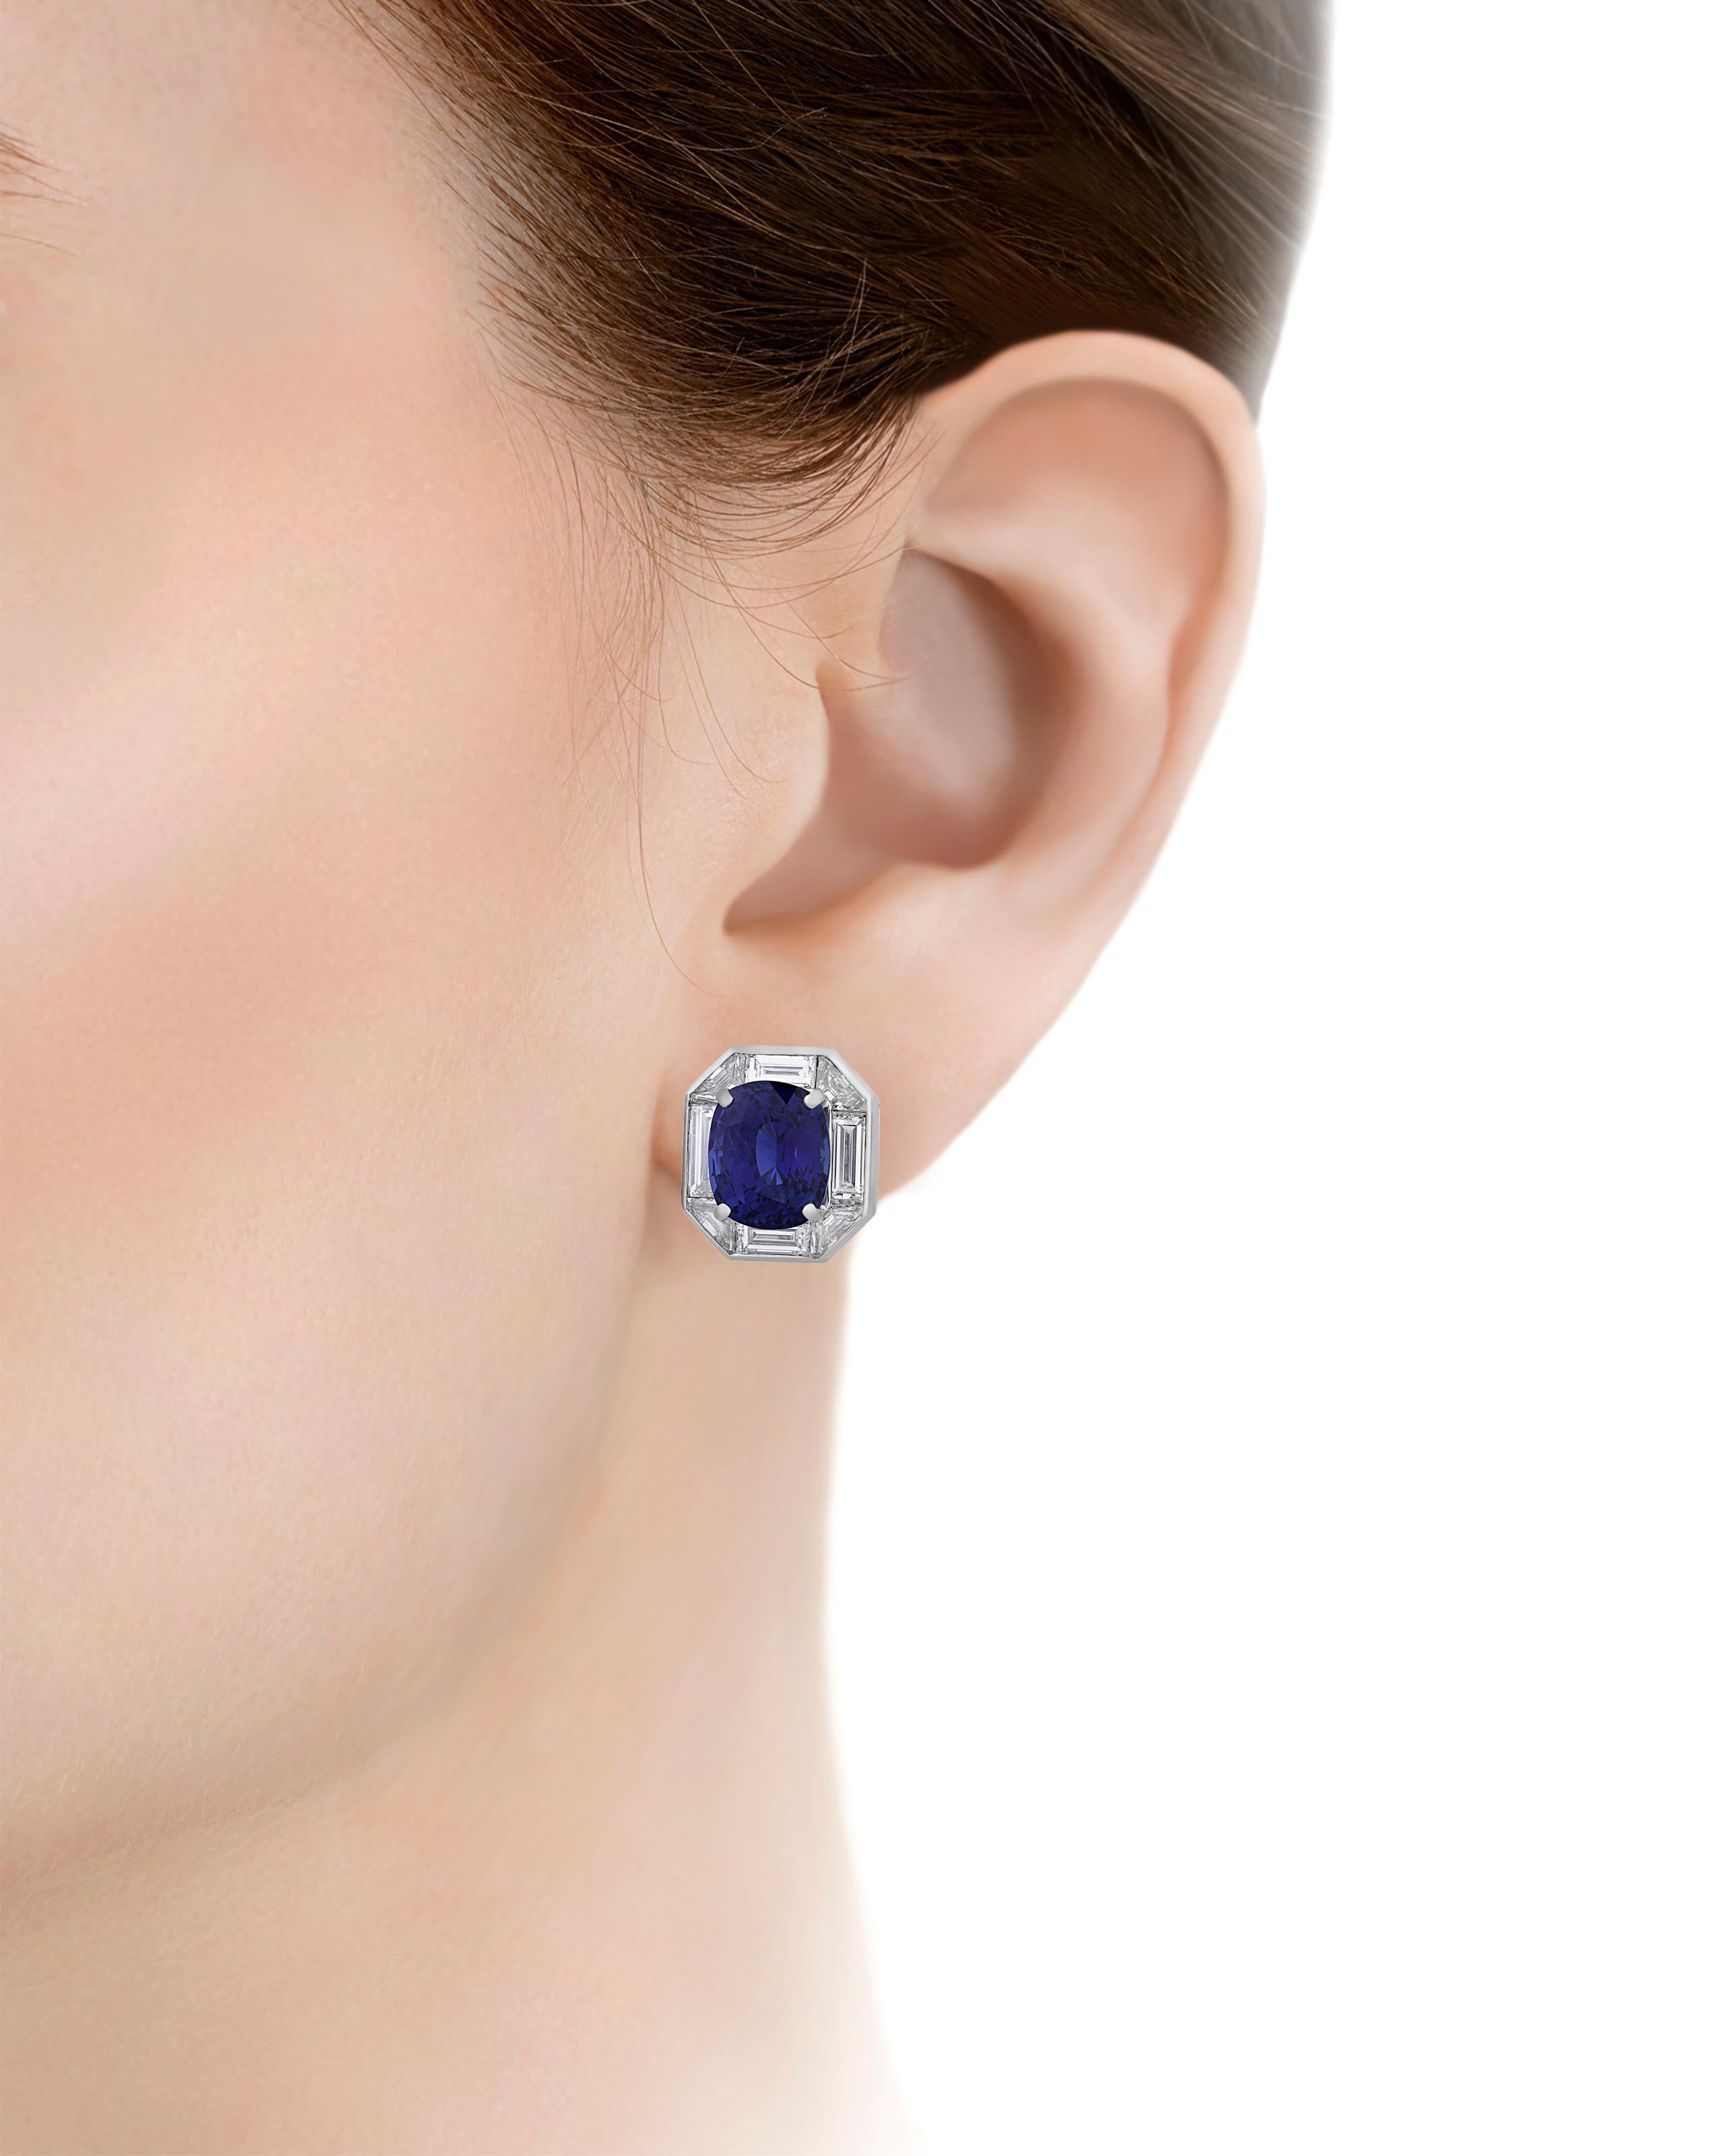 Two impressive cushion cut Ceylon sapphires totaling 10.60 carats are set in these glamorous earrings by famed jewelry designer Oscar Heyman. Displaying a vivid 